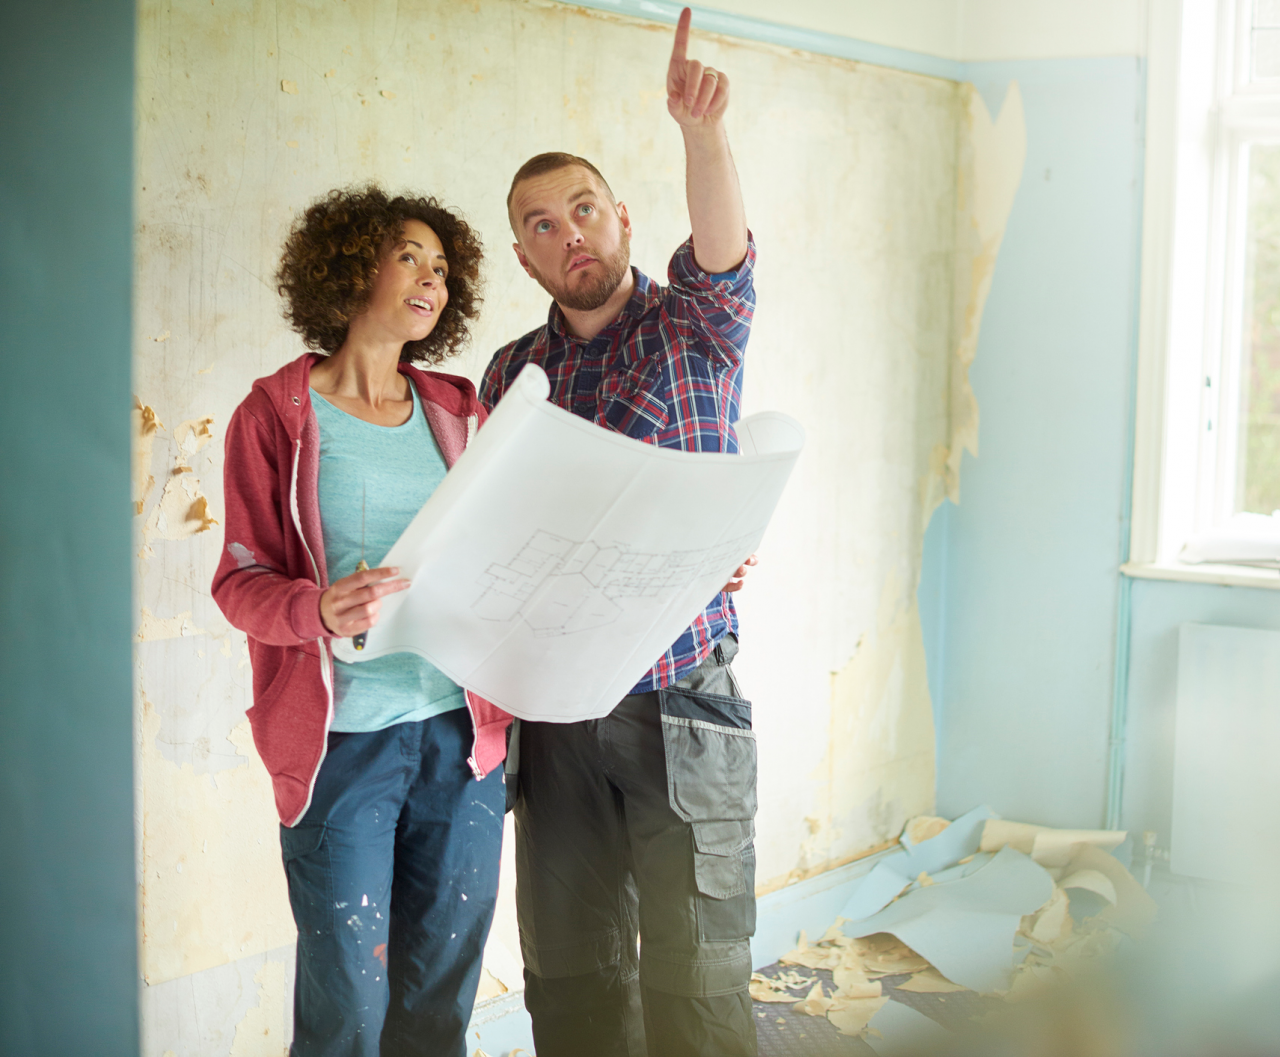 A couple looking at a blueprint discussing a renovation in their house.